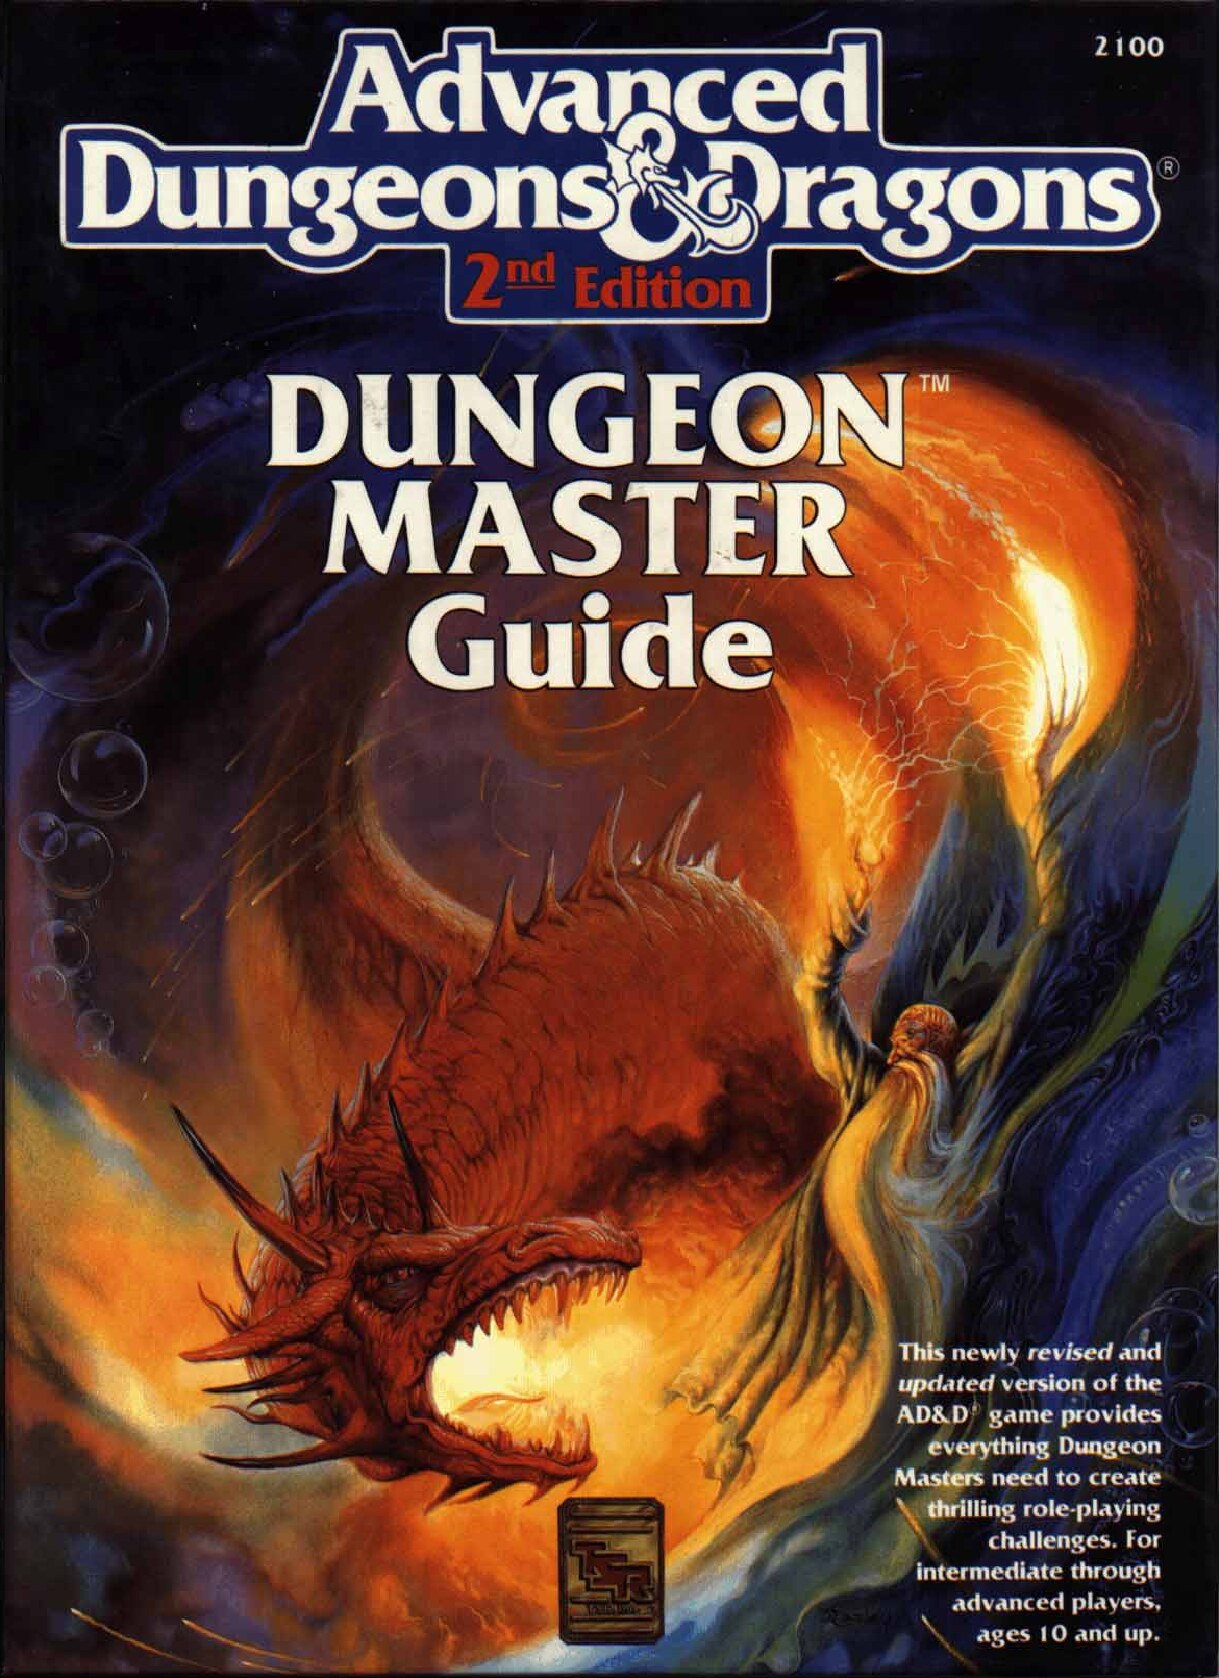 Dungeon Master's Guide (2100)